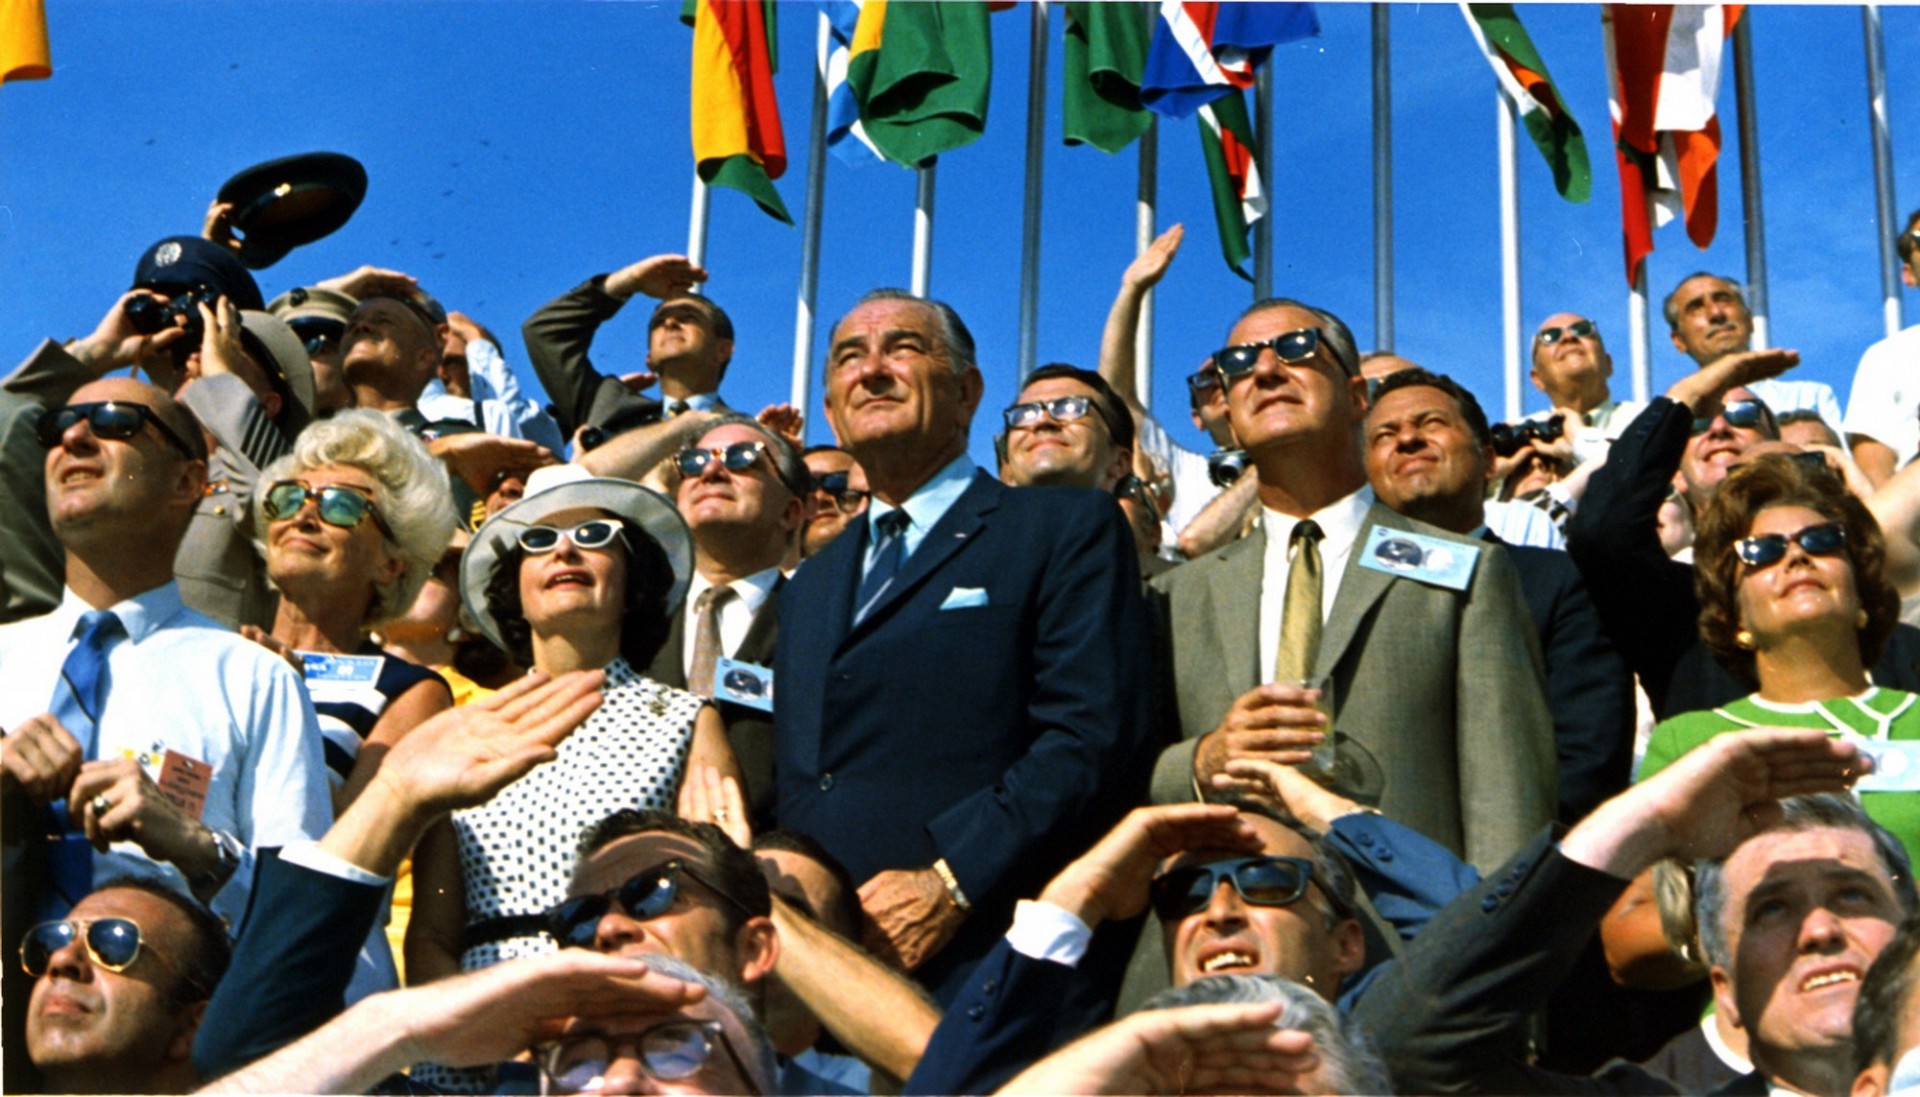 President Johnson and crowd watch return of Apollo 11